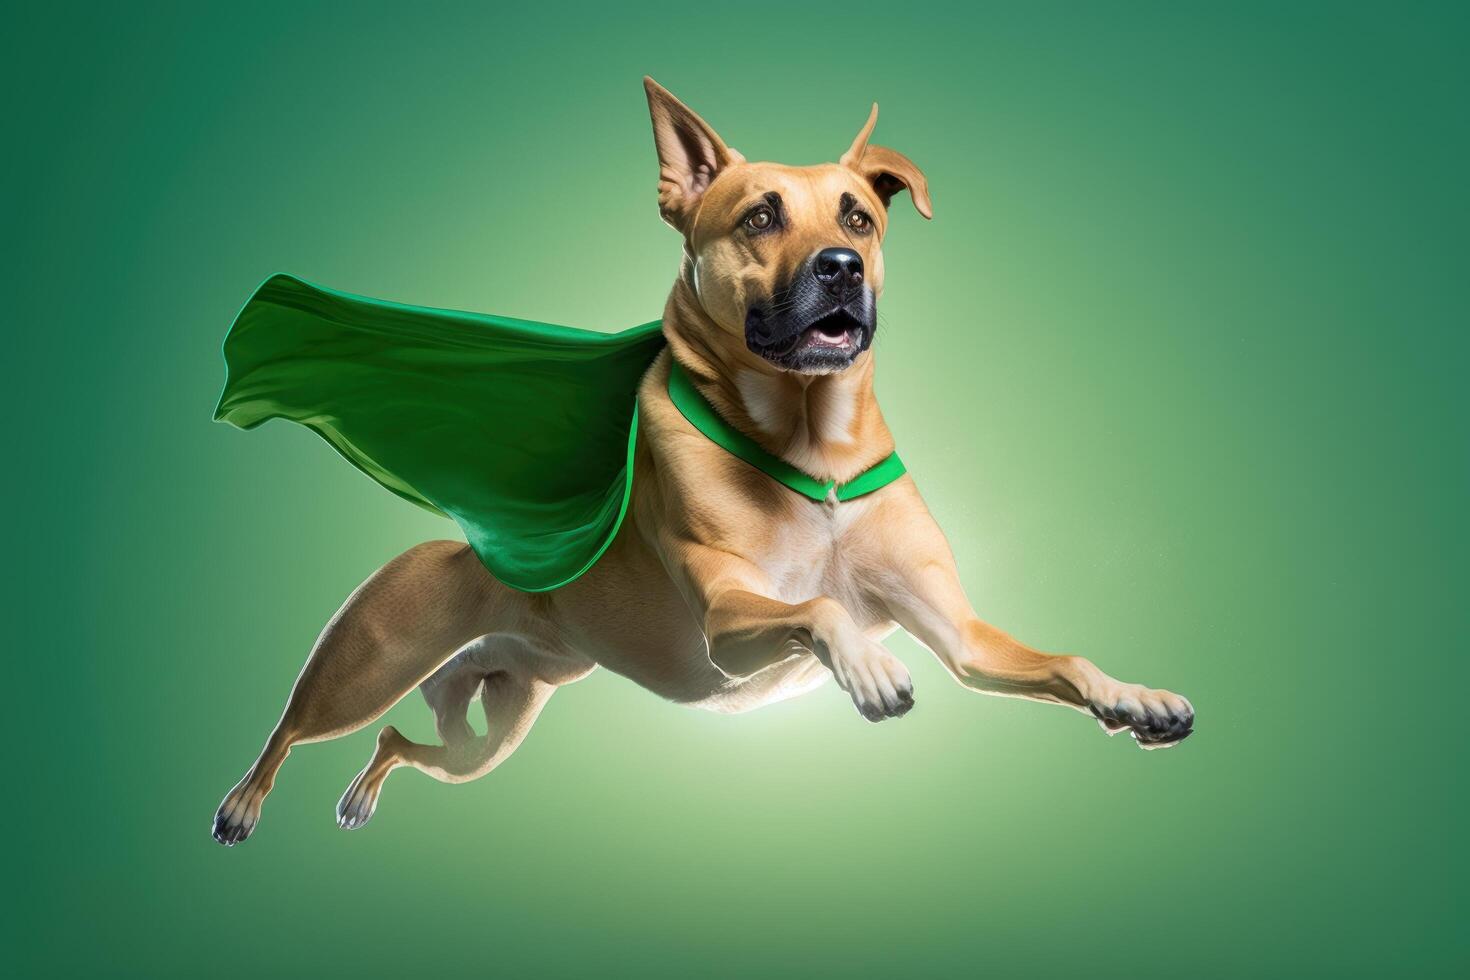 Superpet Dog as superhero with cape background. Created photo